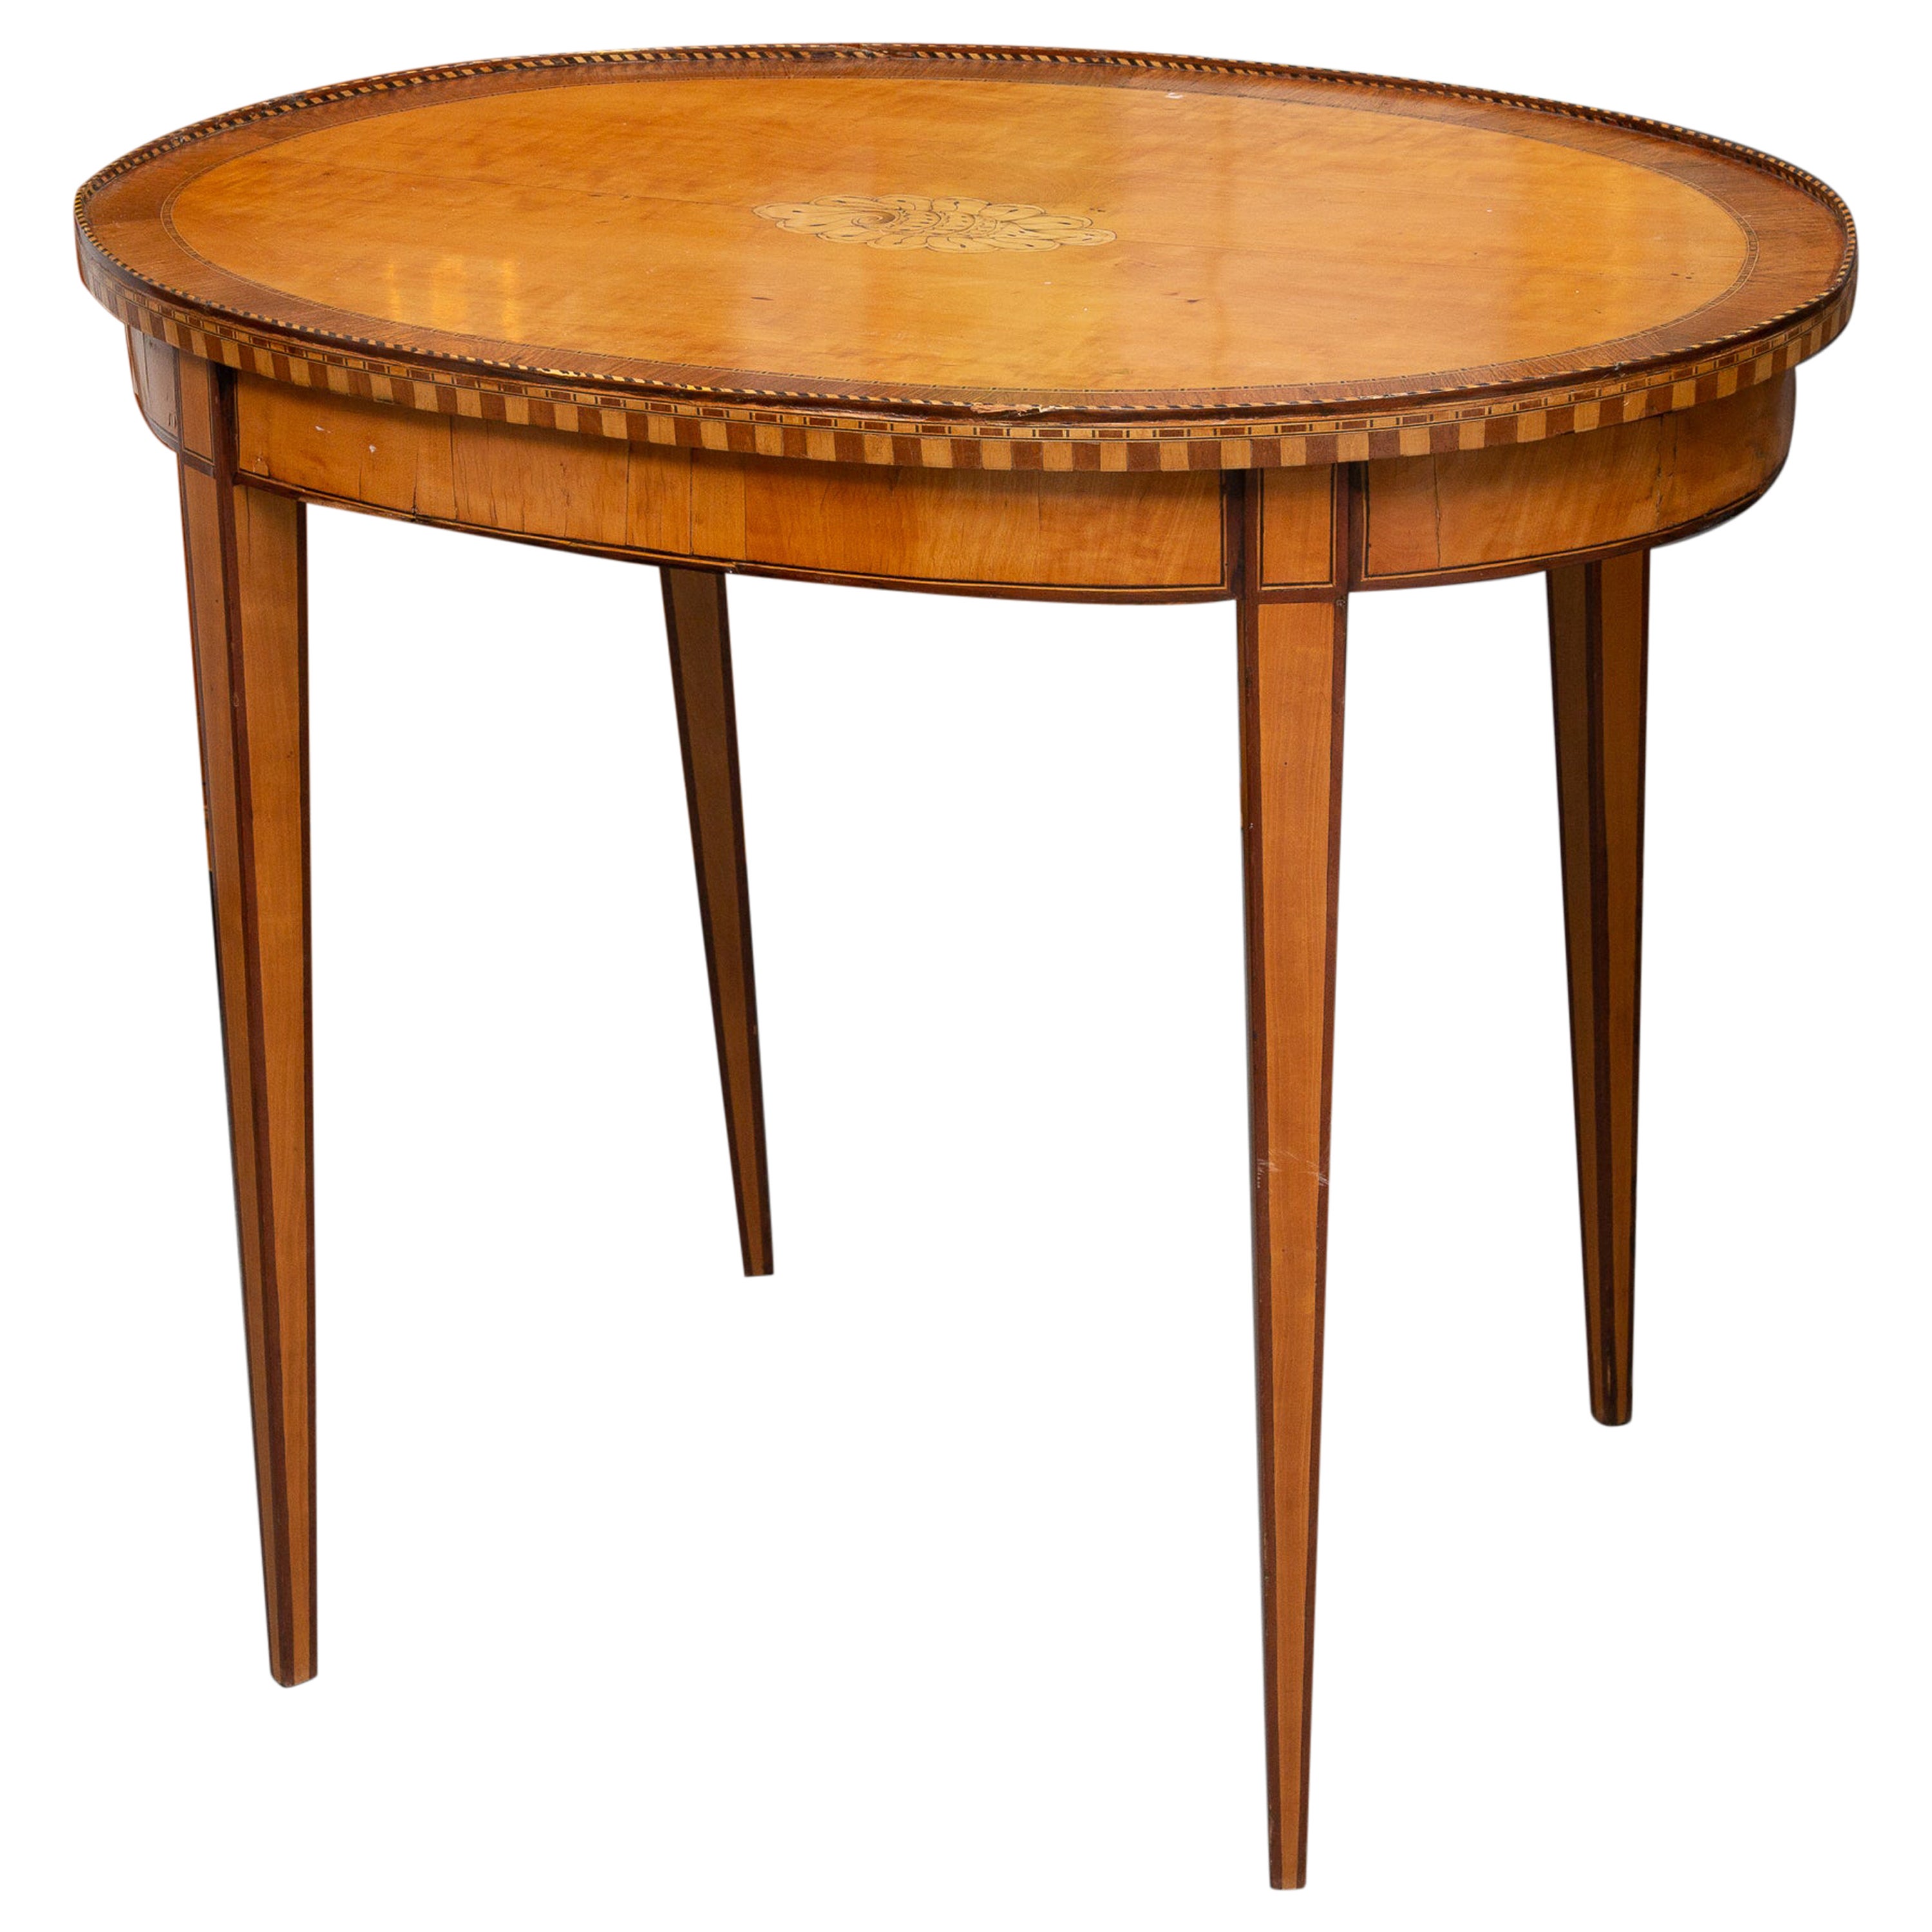 19th Century Oval George III Style Satinwood Side Table For Sale